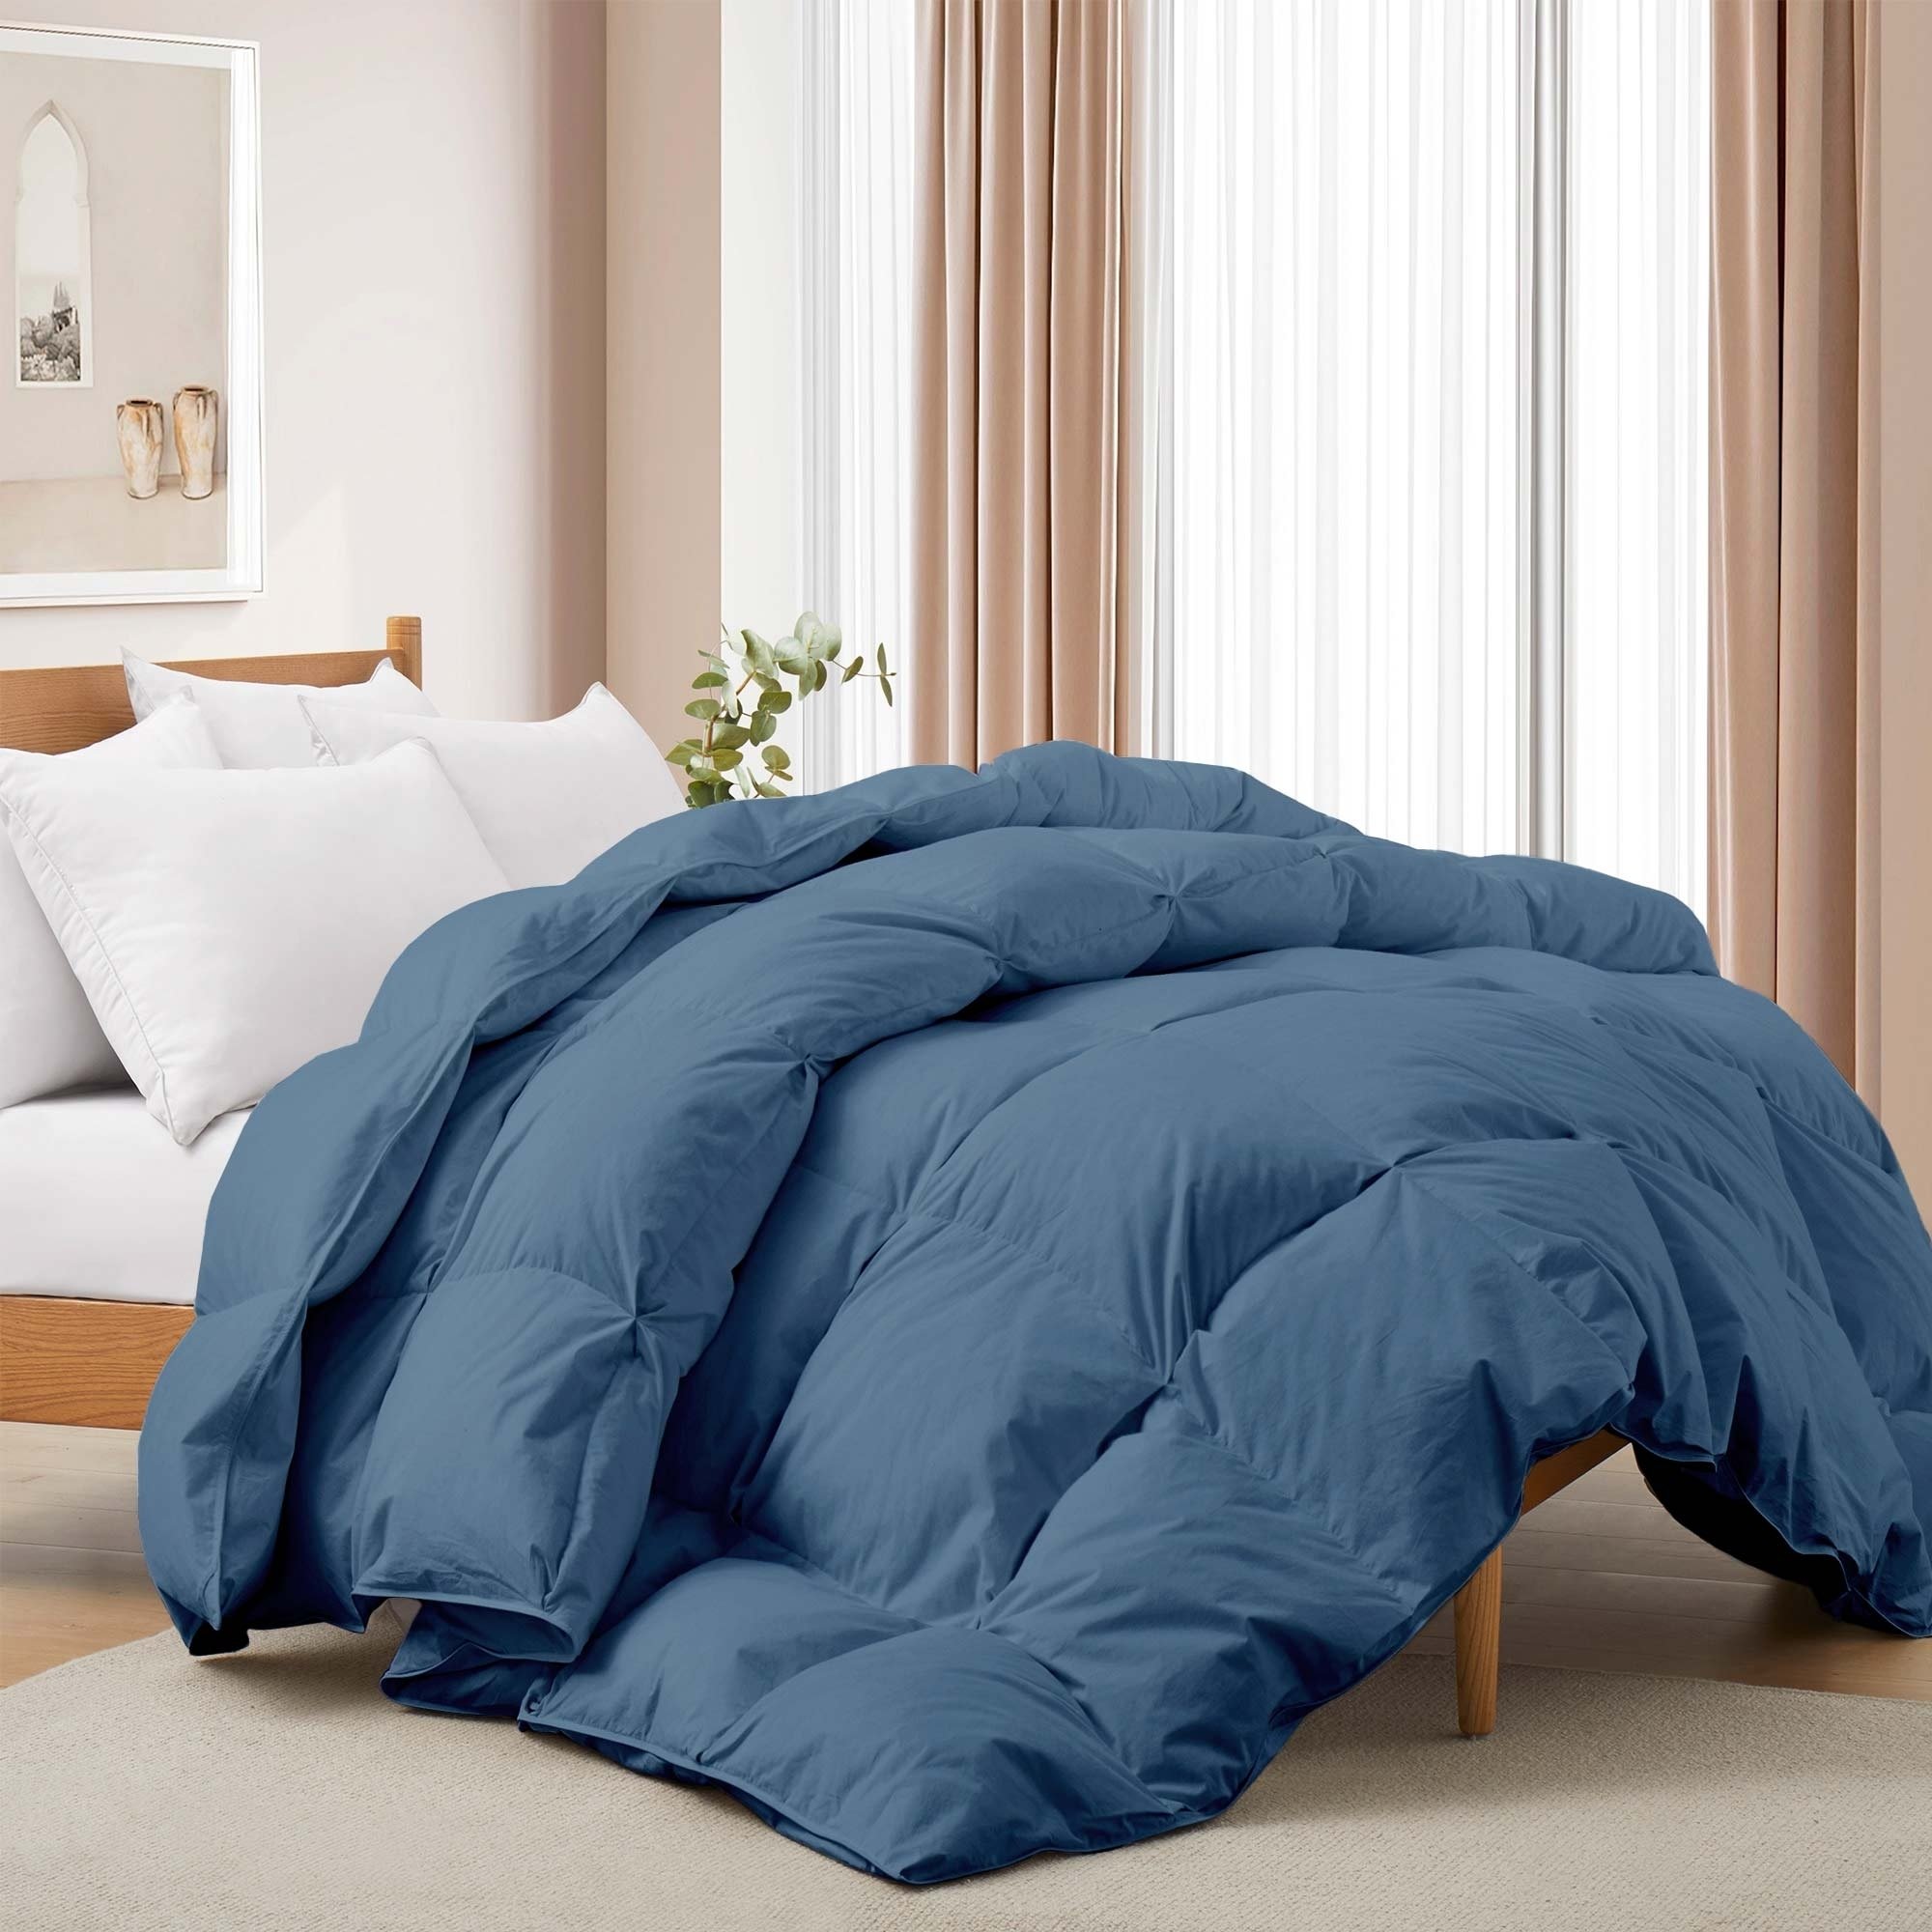 All Seasons Pinch Pleat Goose Feather And Down Comforter-Breathable Cotton Fabric Baffled Box Duvet Insert - Stellar Blue, Twin